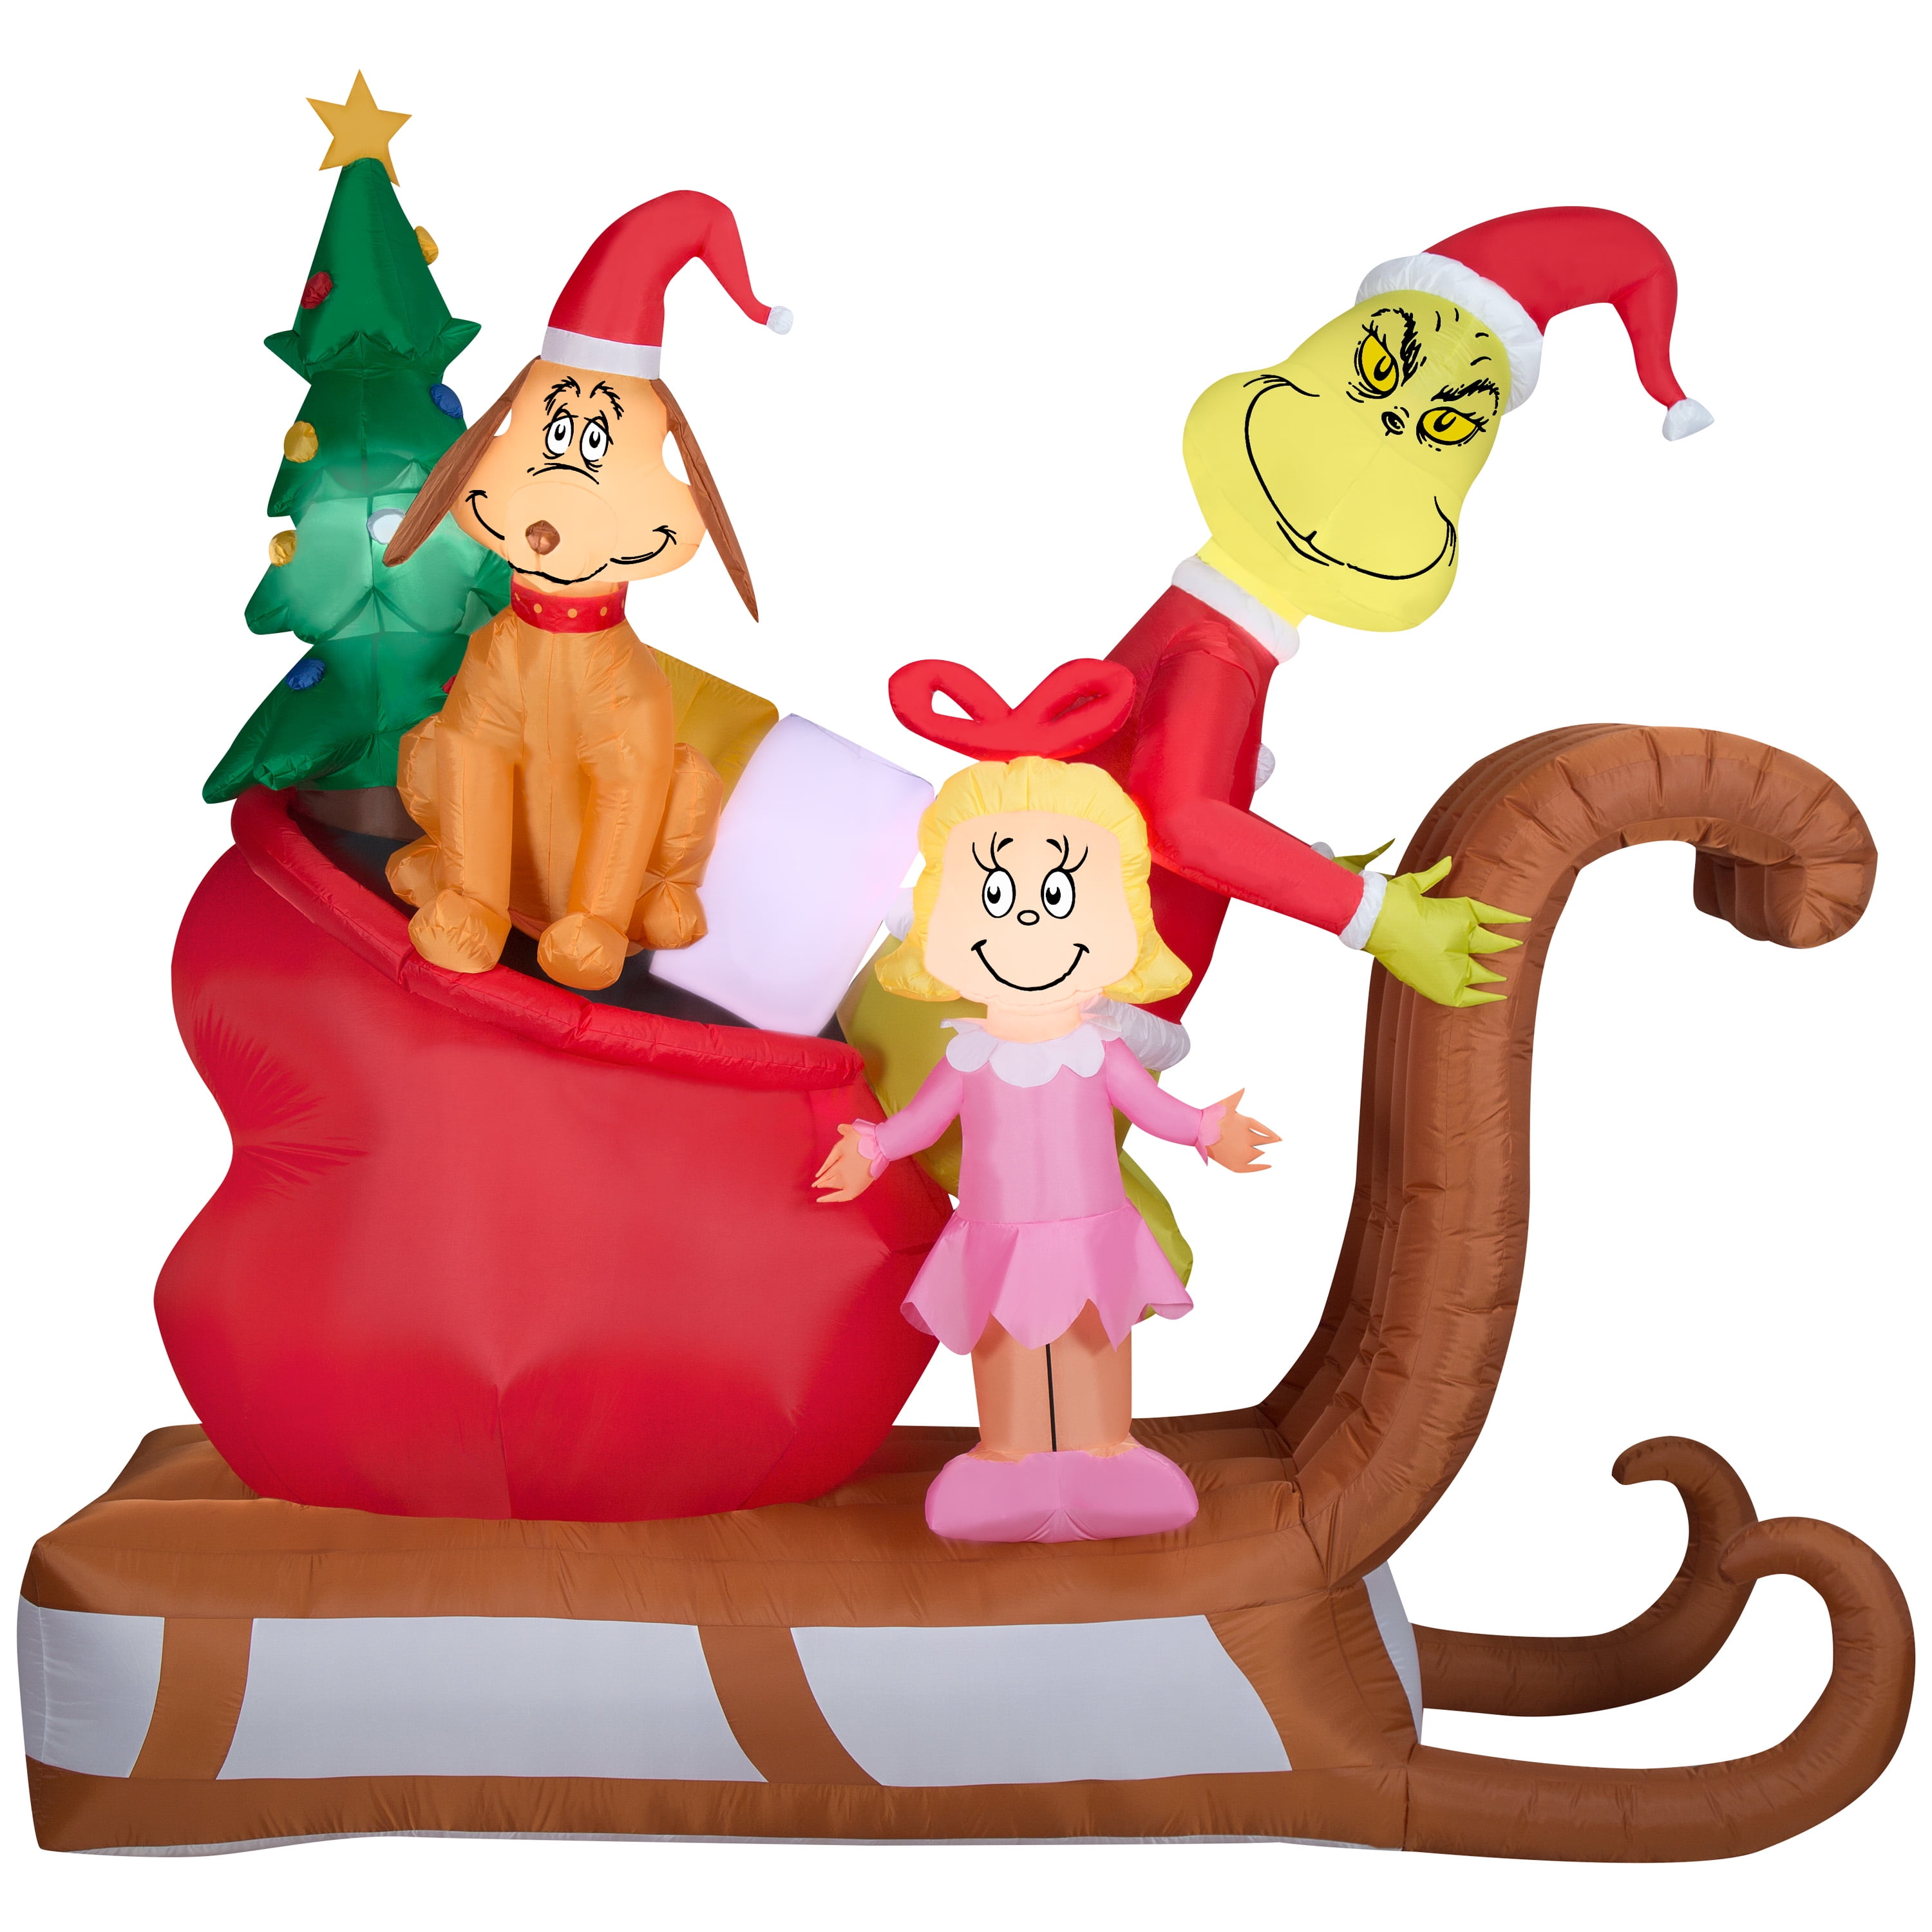 Grinch with Max and Cindy Lou on Sled, 9 Foot Scene